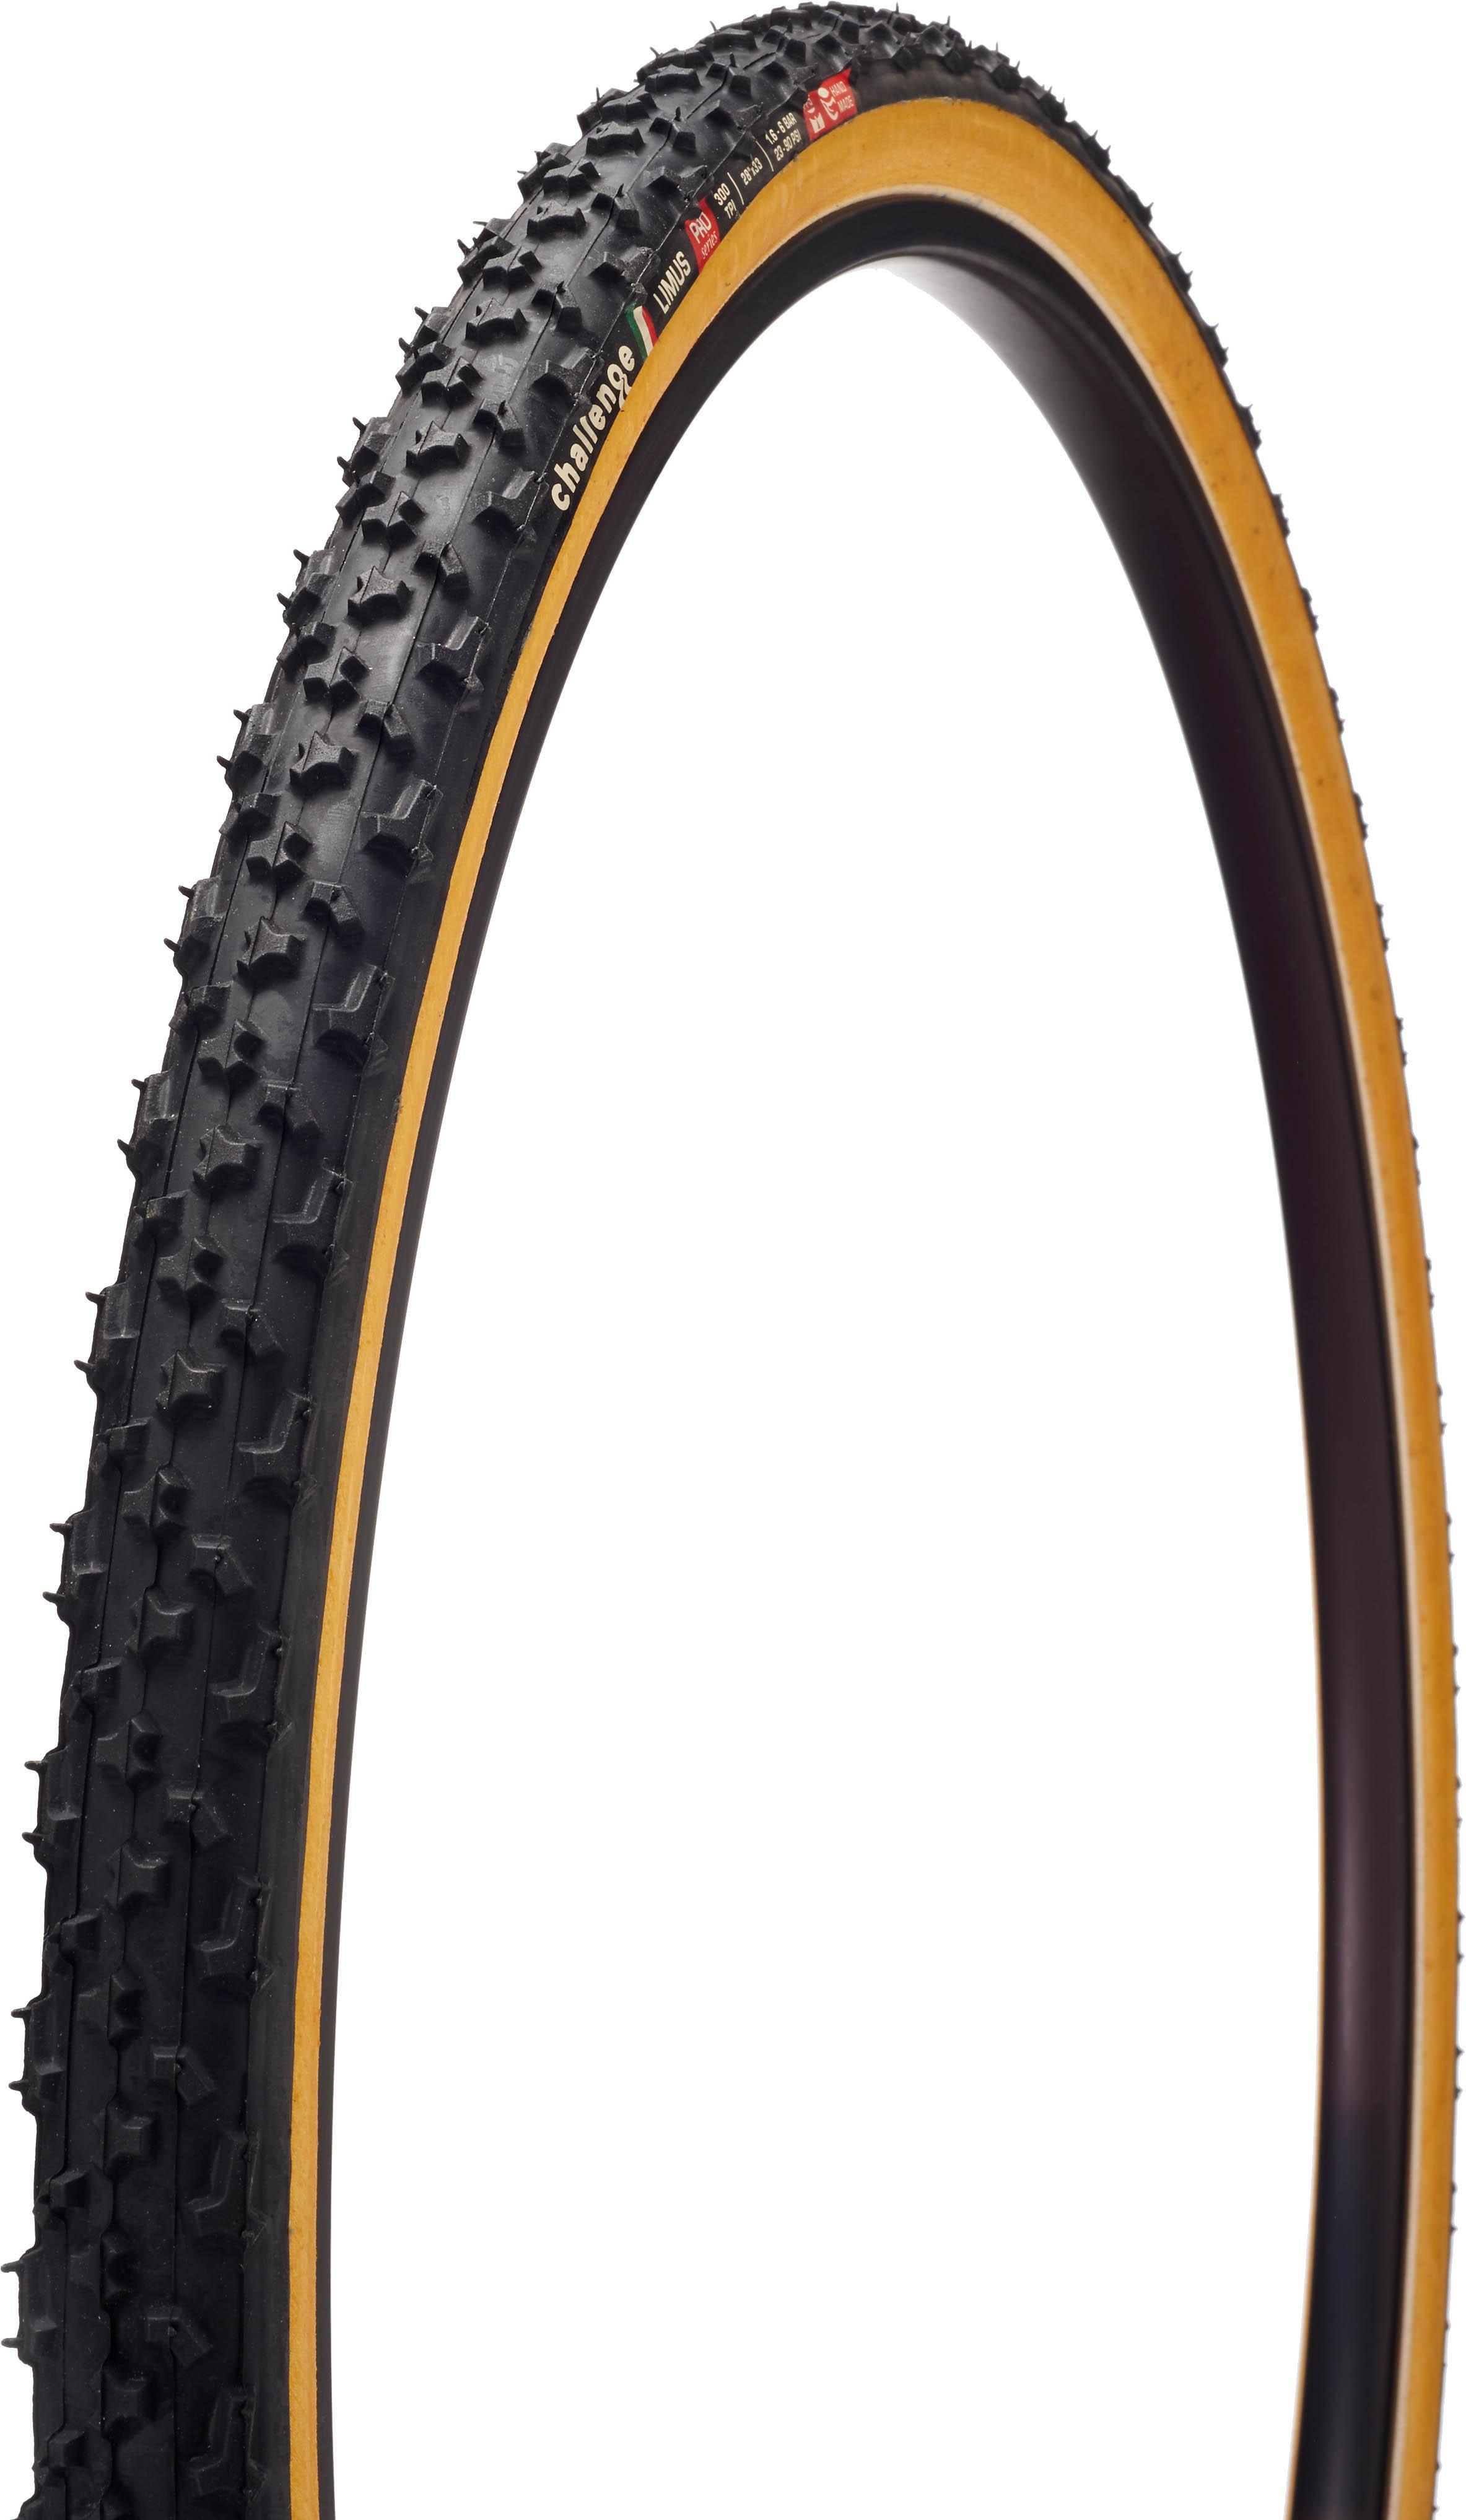 Challenge Limus 33 Open Cyclocross Tyre - Black/tan Wall